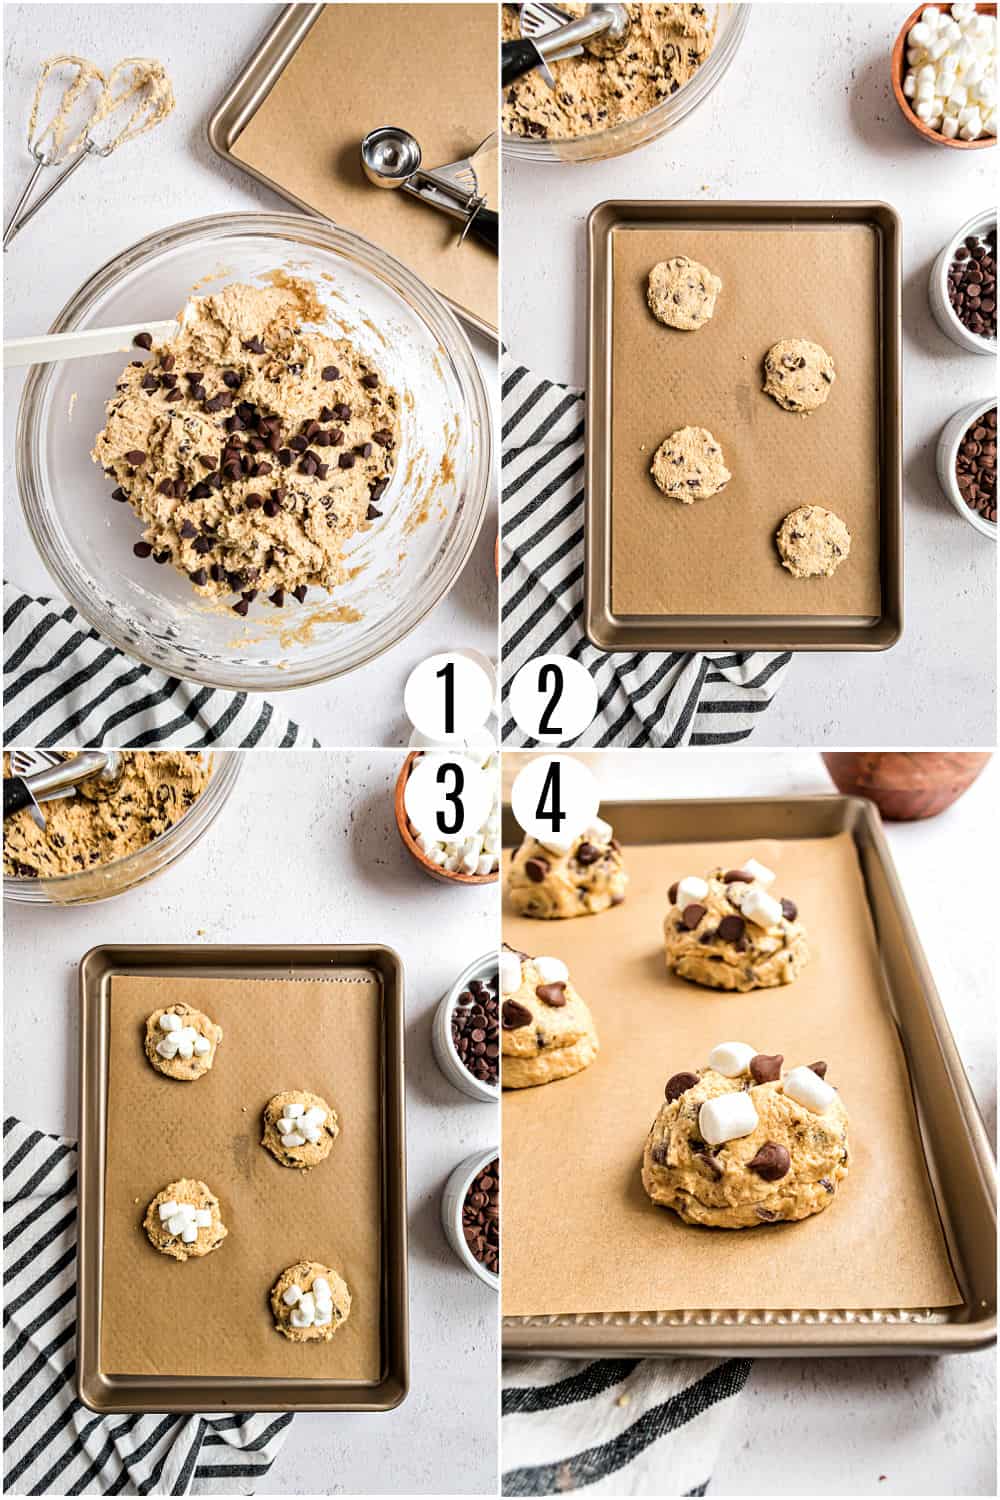 Step by step photos showing how to make smores cookies.